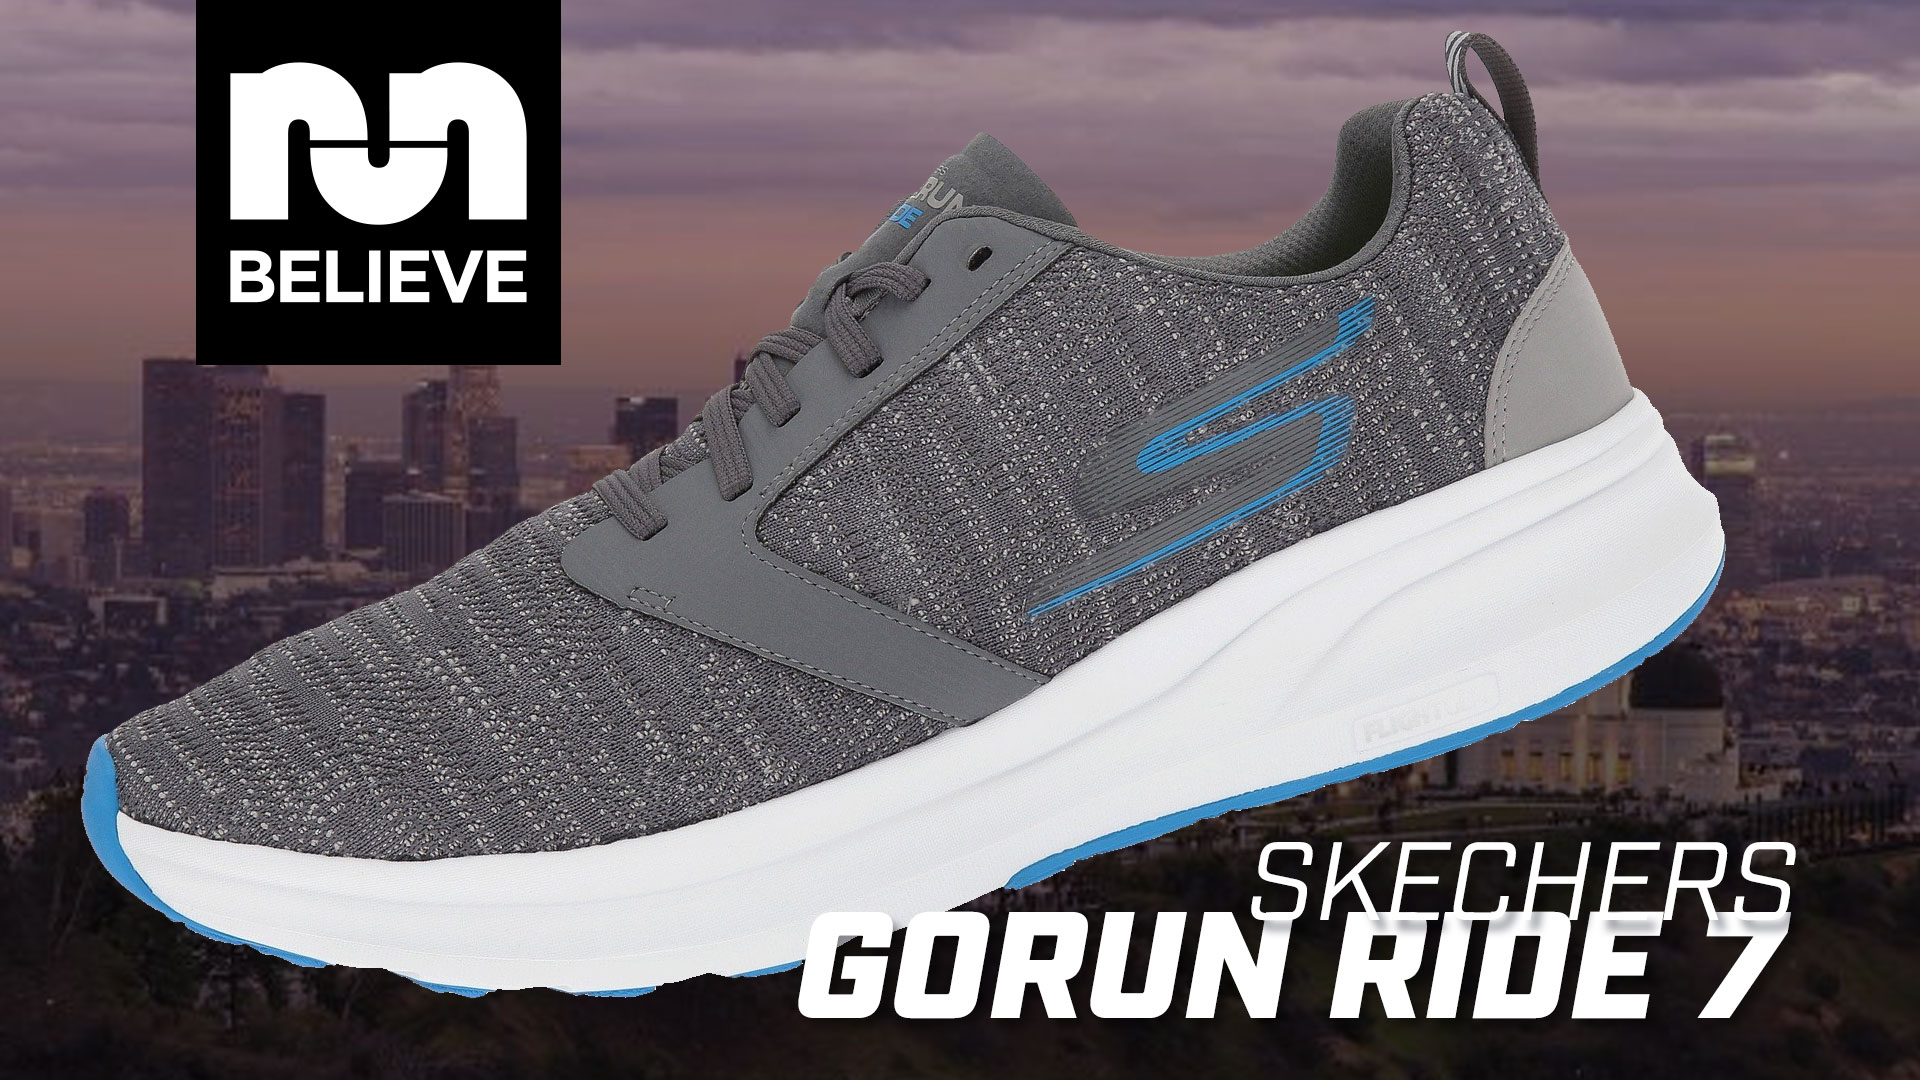 skechers performance review Off 79 